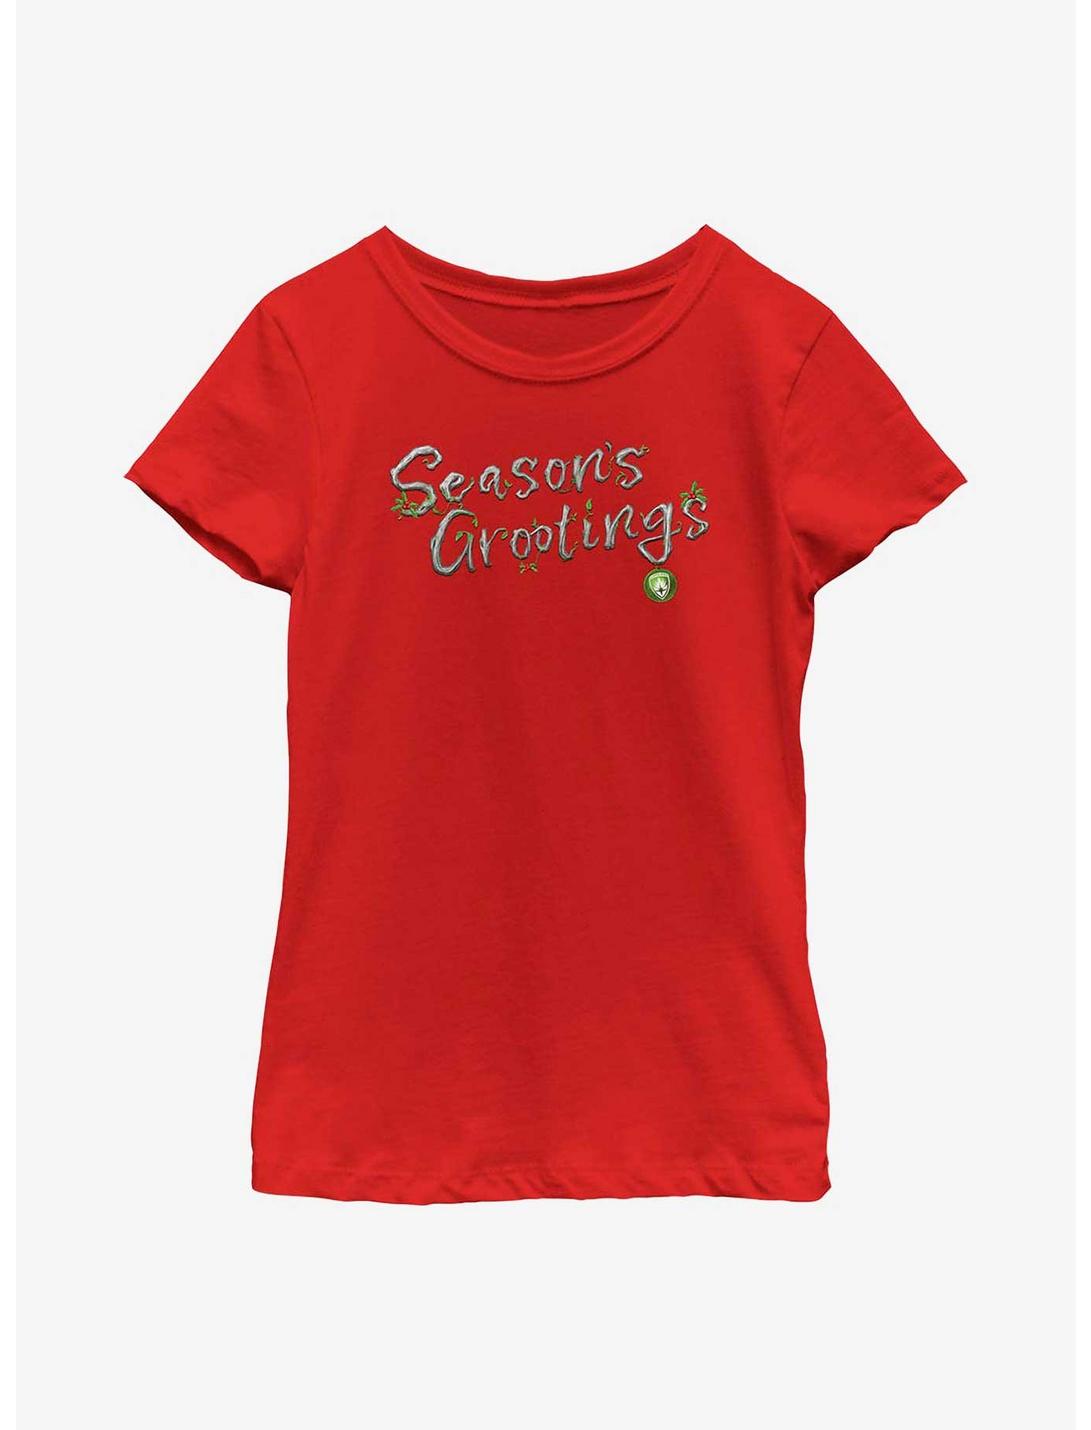 Marvel Guardians of the Galaxy Holiday Special Seasons Grootings Youth Girls T-Shirt, RED, hi-res